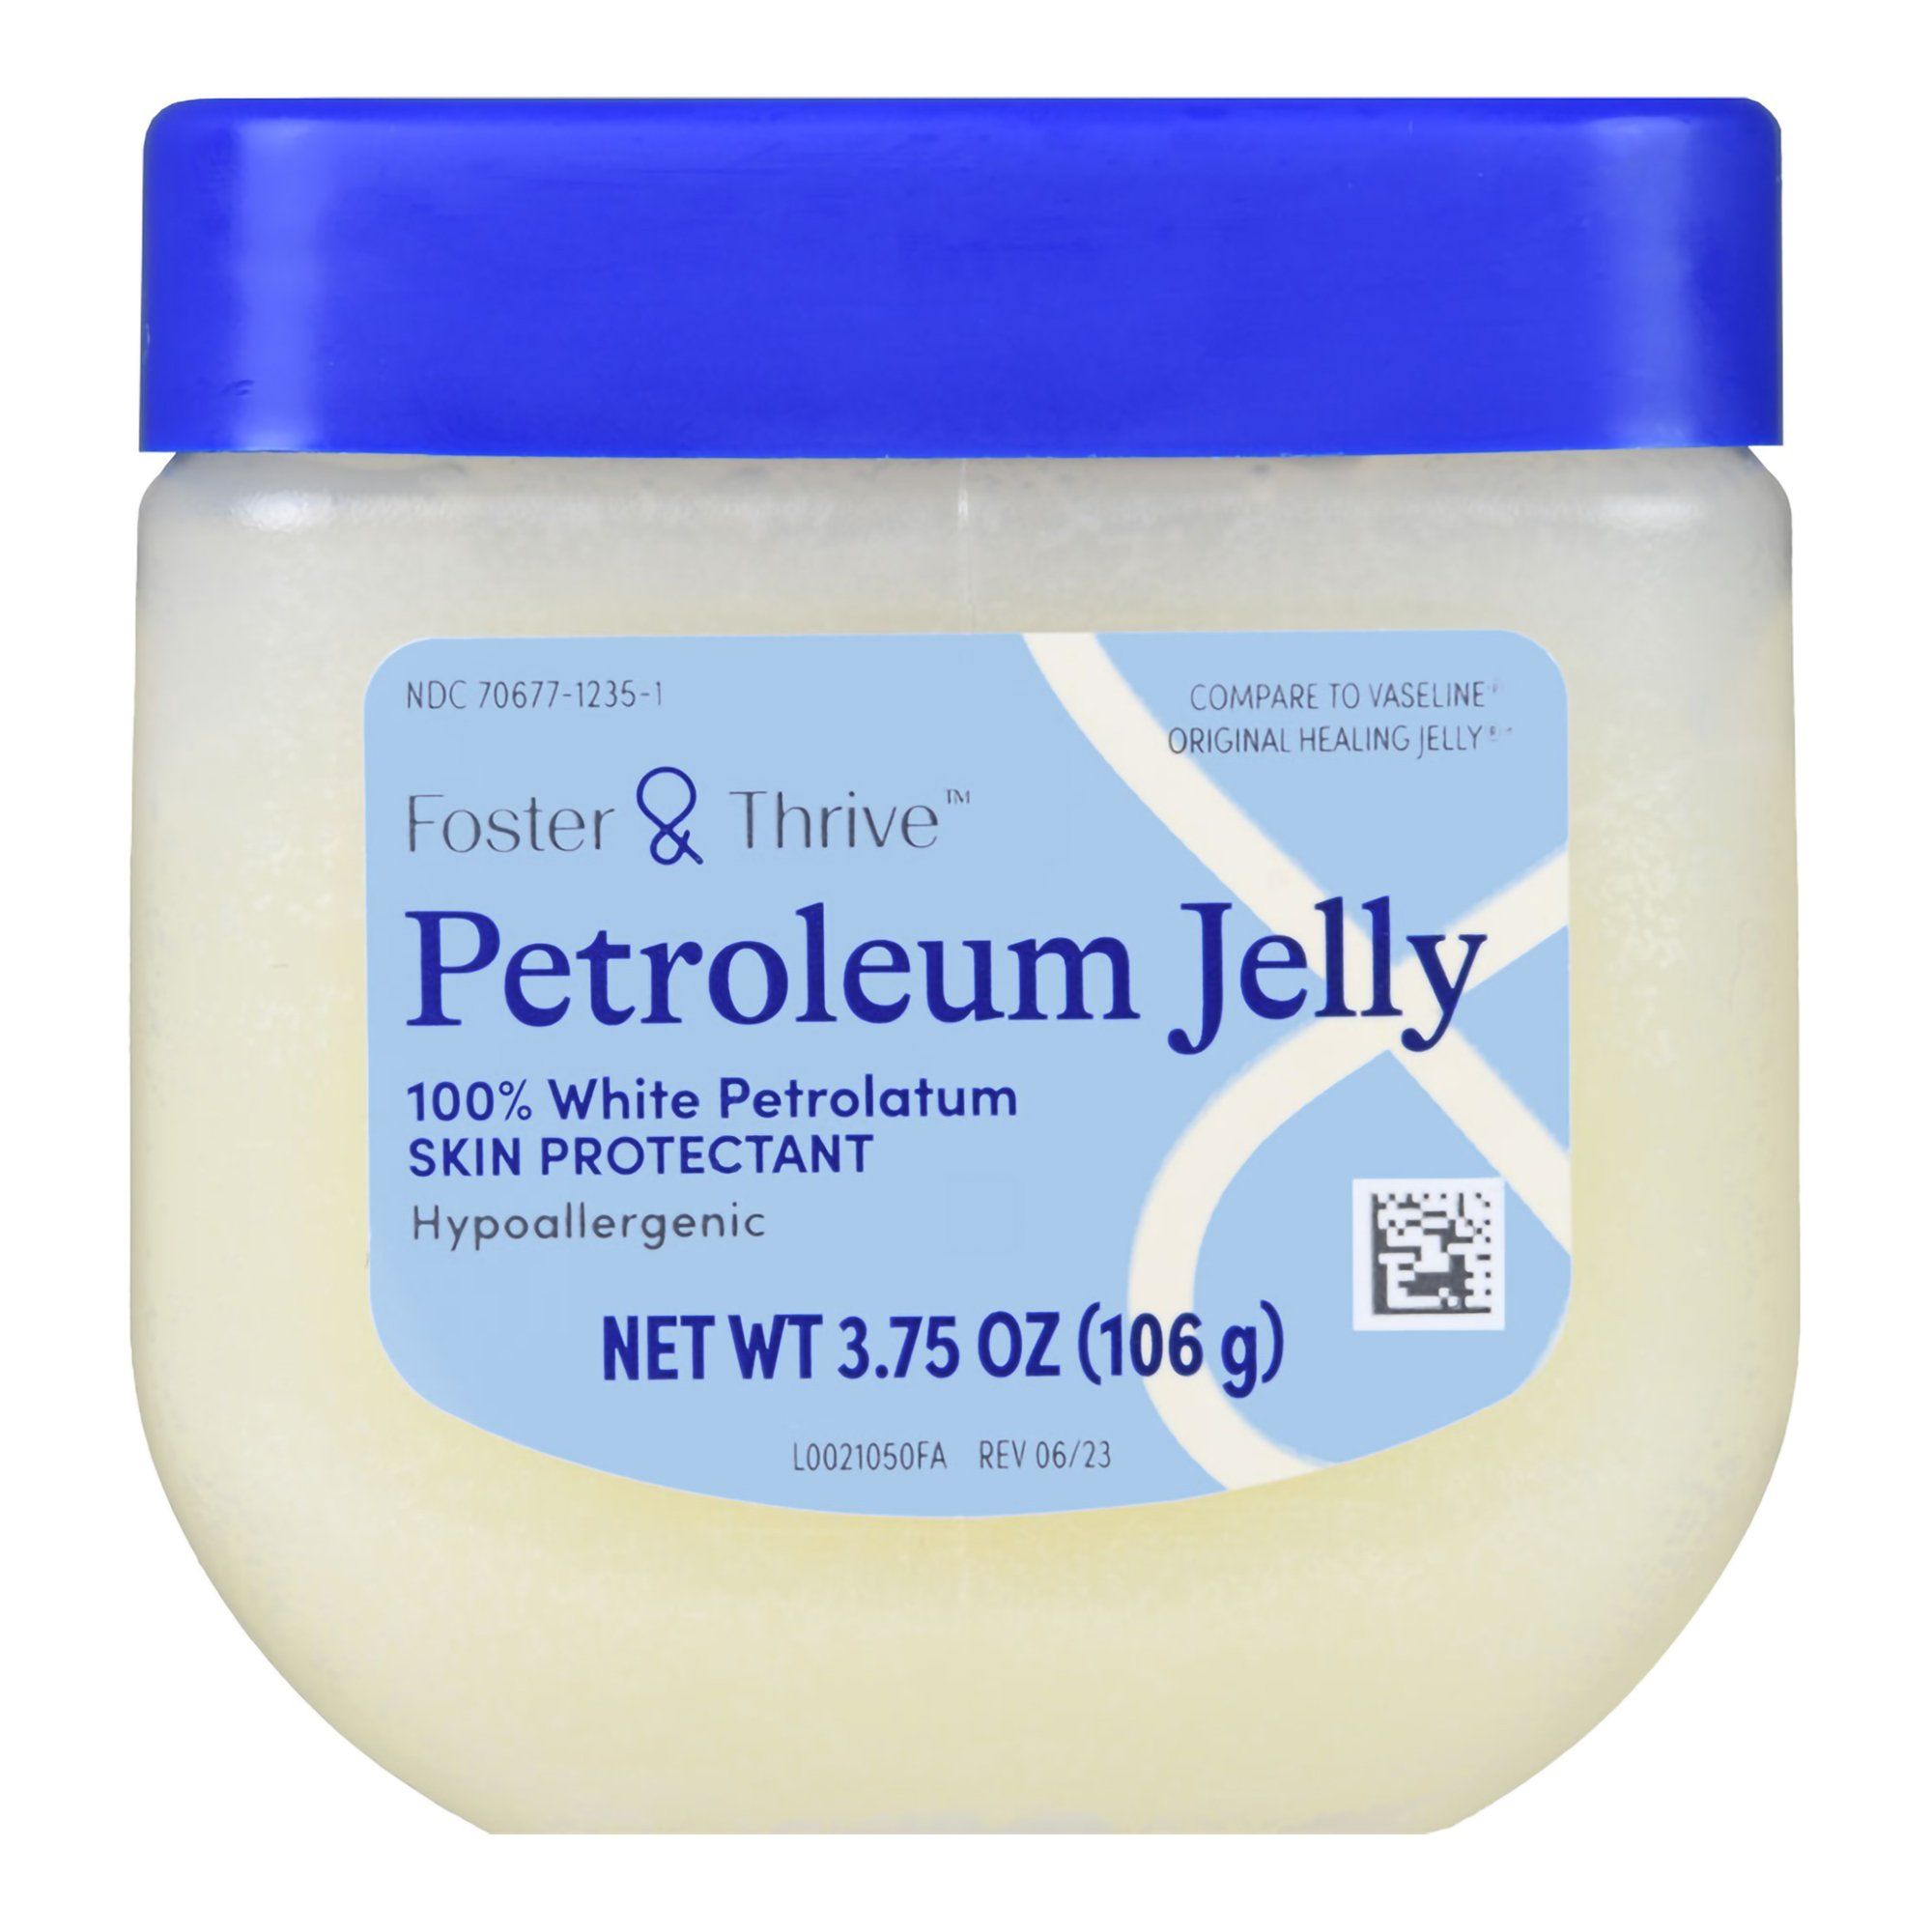 Foster & Thrive Petroleum Jelly - 3.75 oz - 1 ct